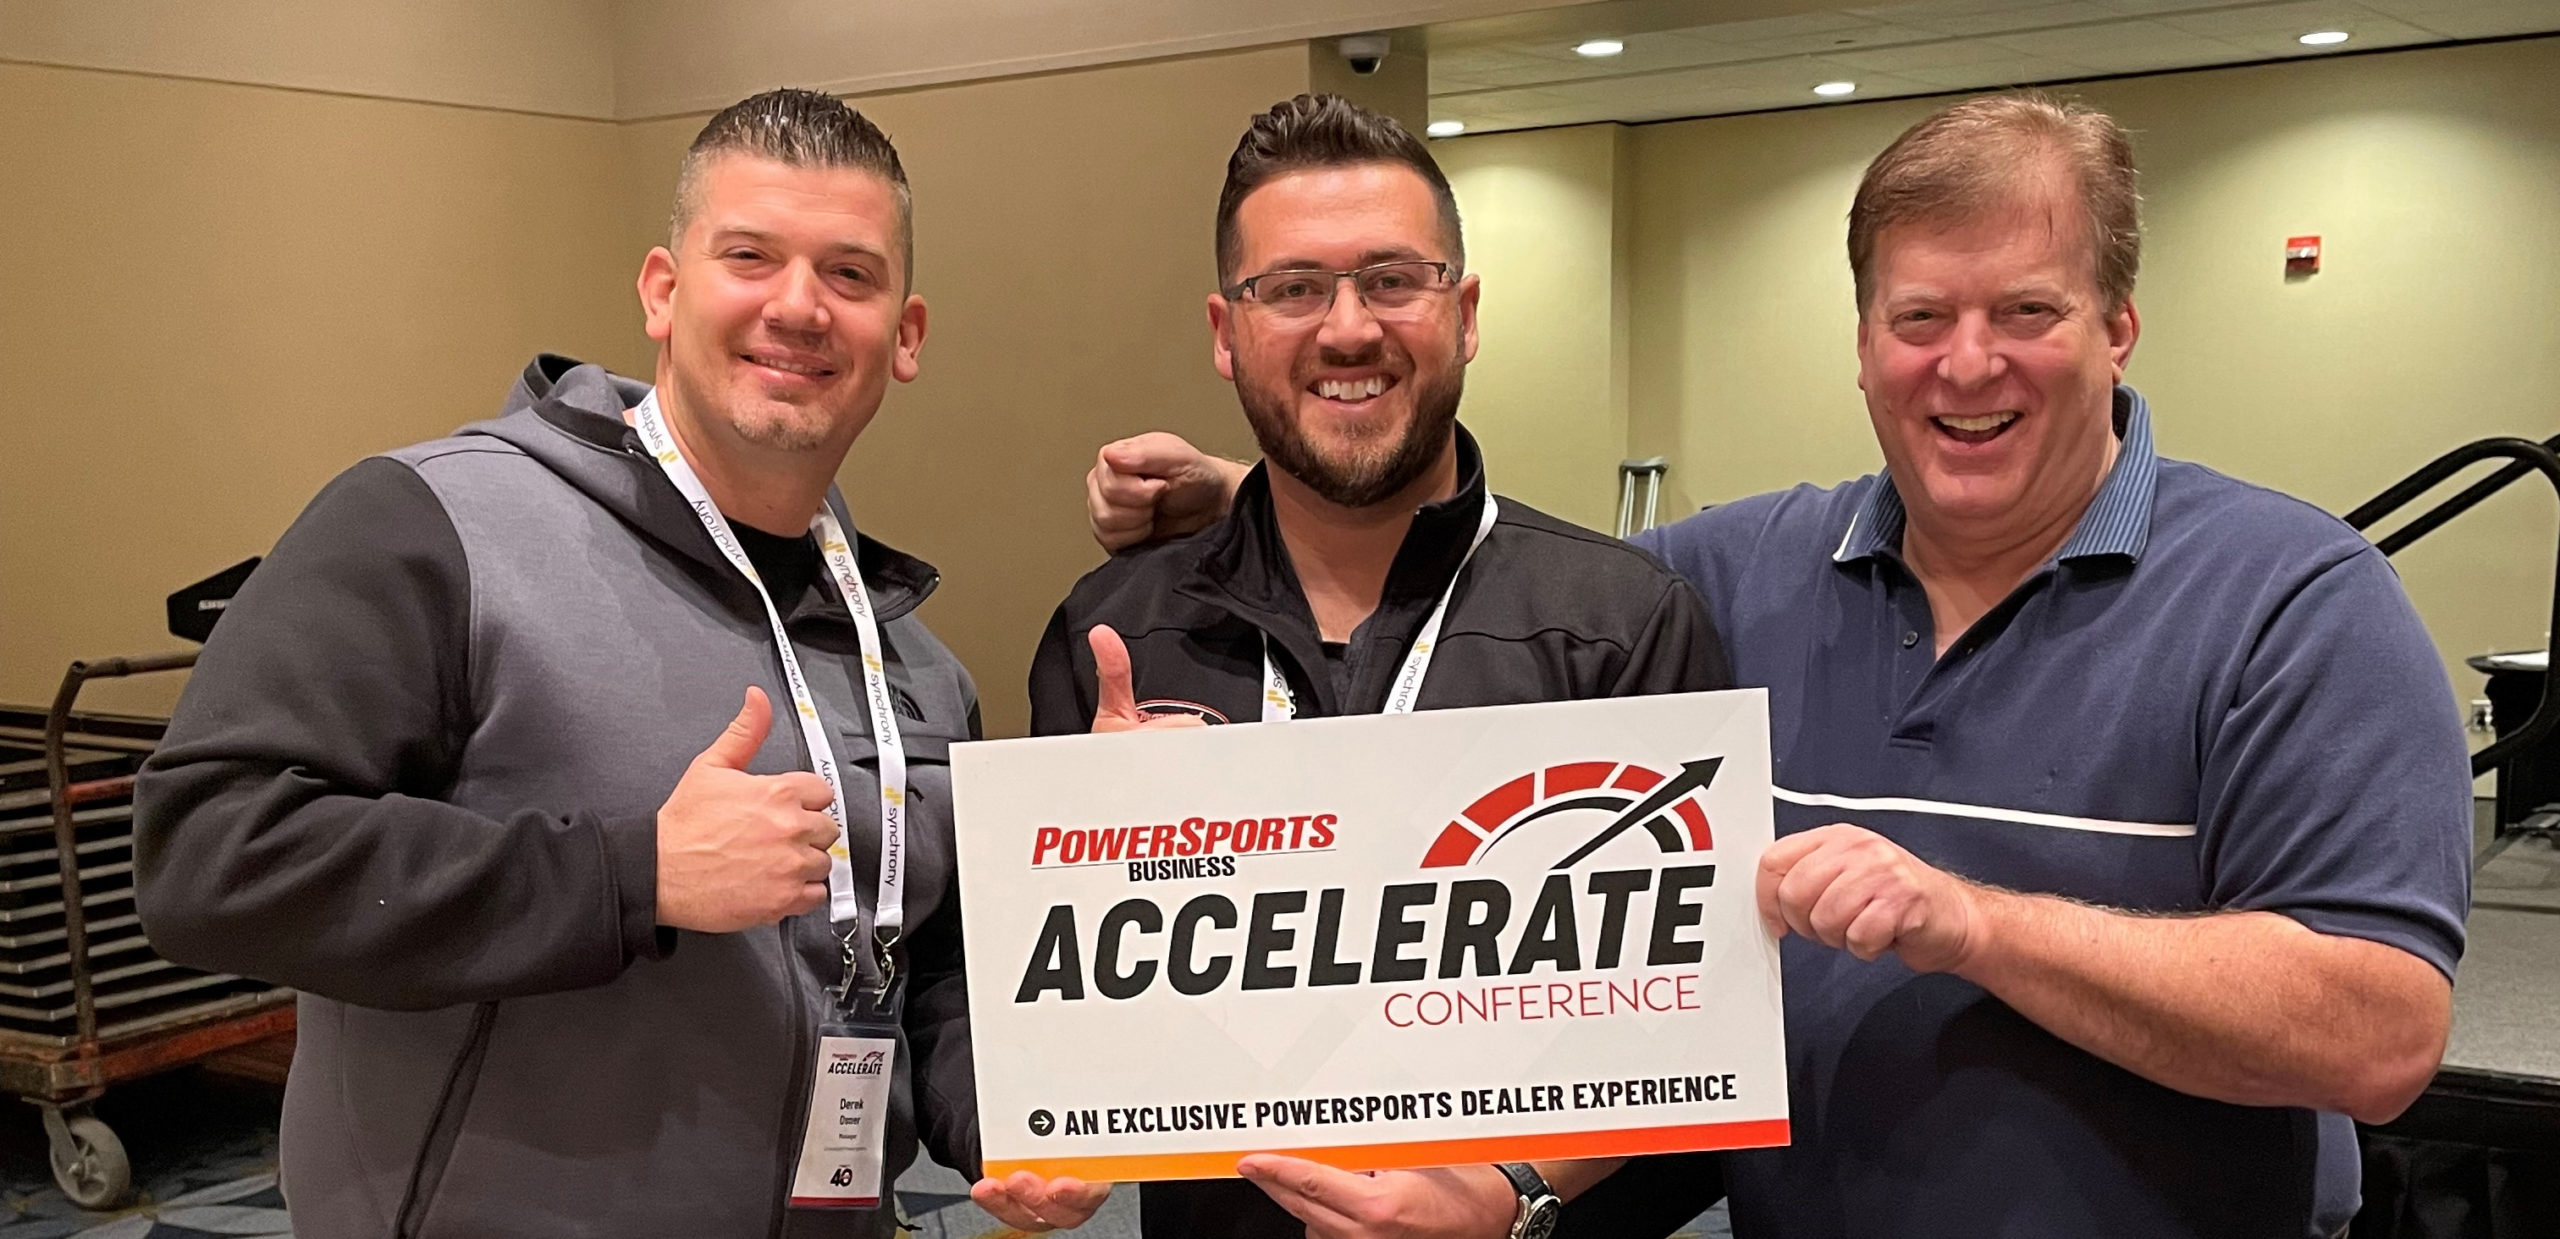 5 Months Out – Accelerate Conference inches closer